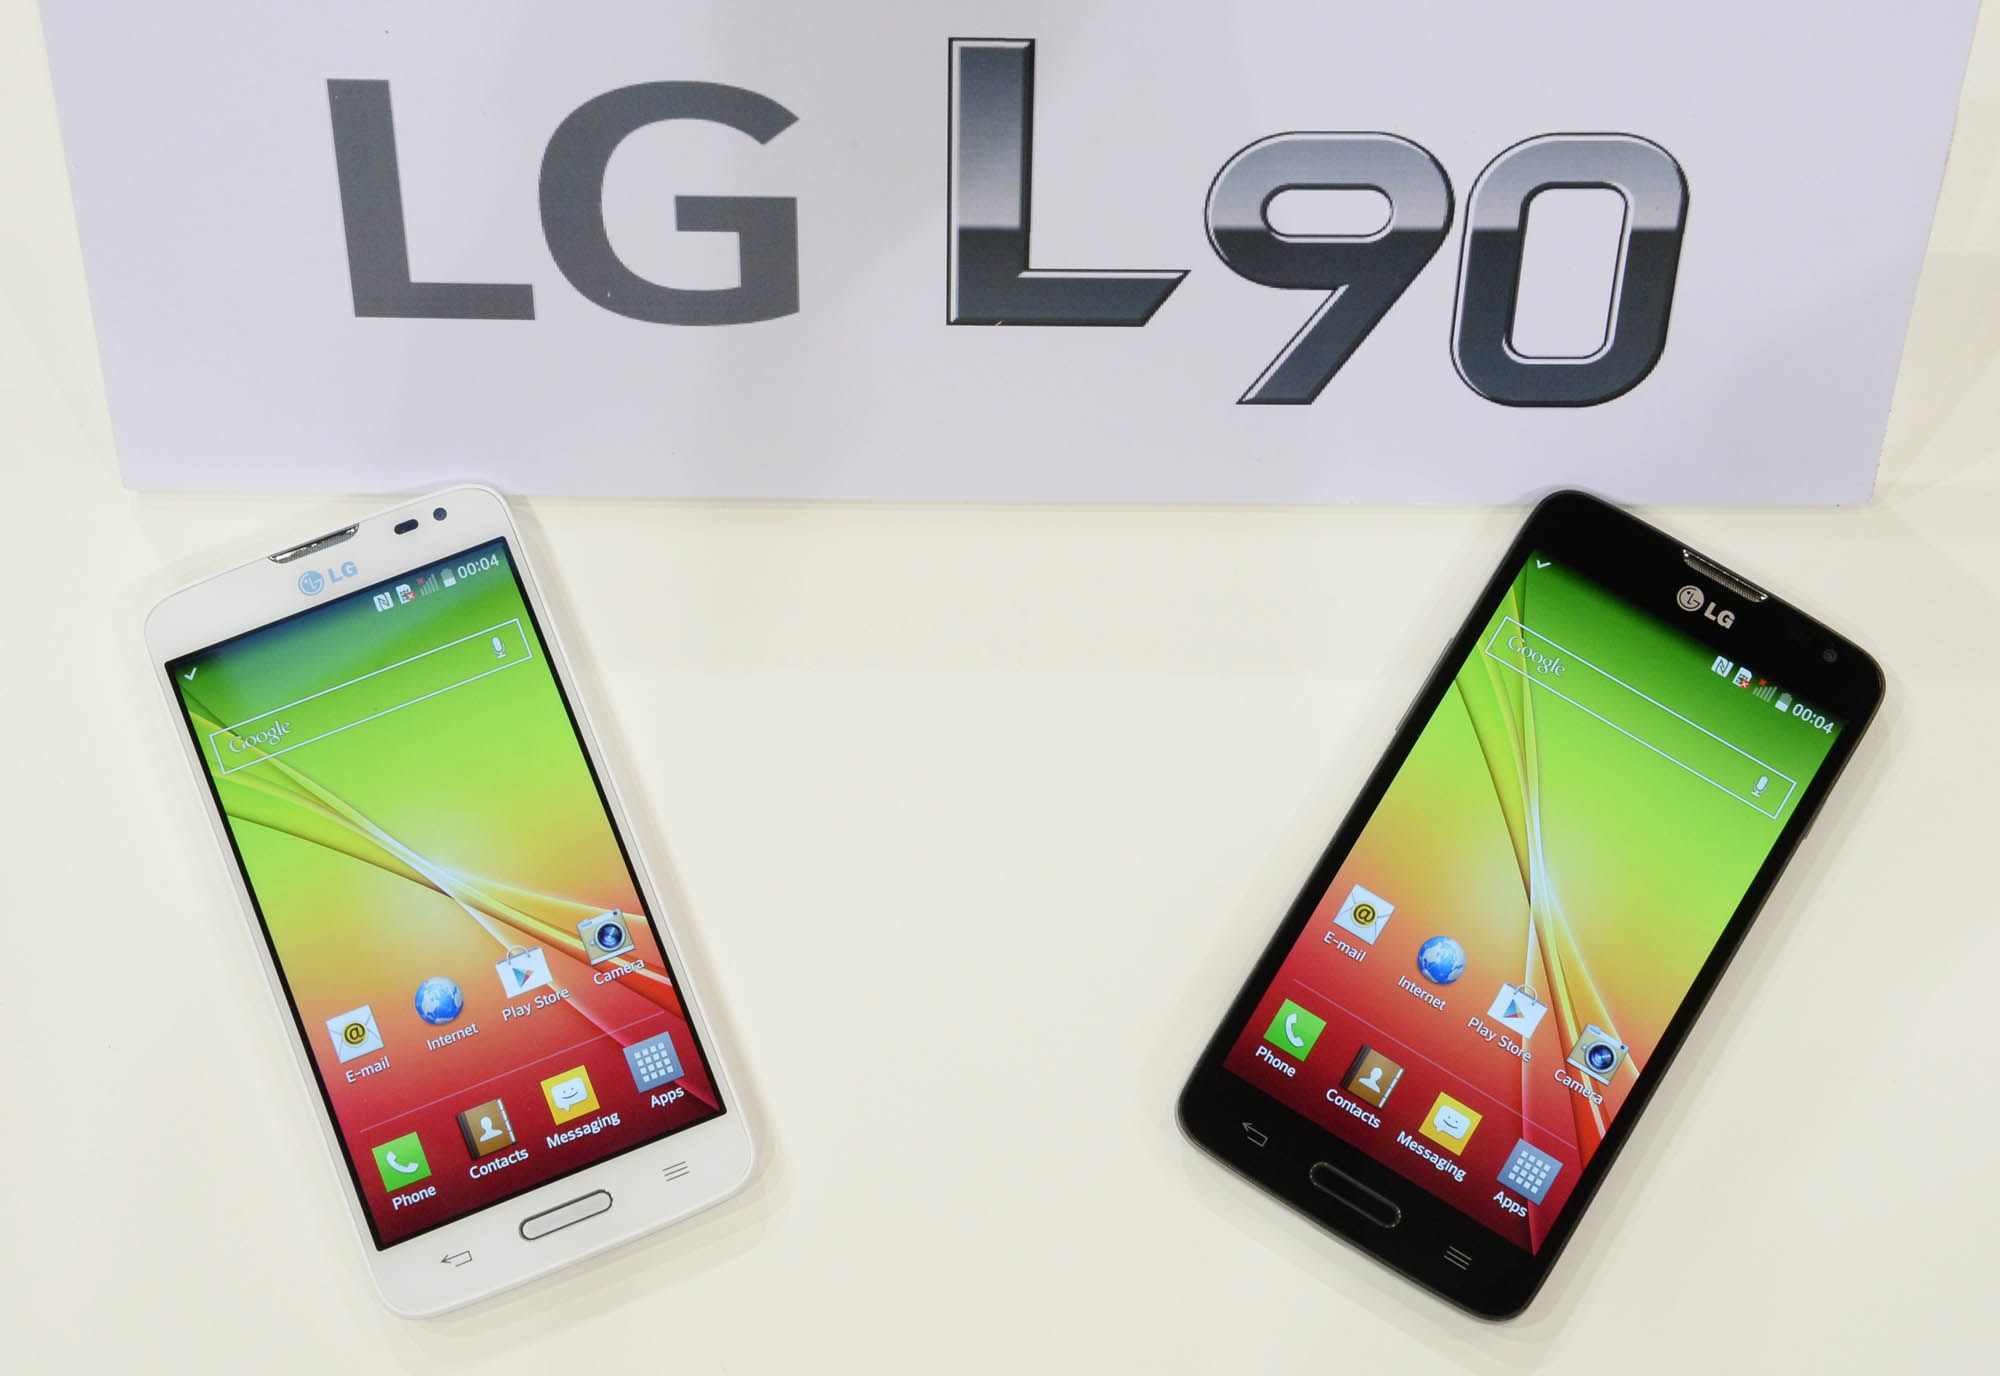 lg l series iii smartphone range debuts with l90 quad core 4 7 inch mid ranger image 2